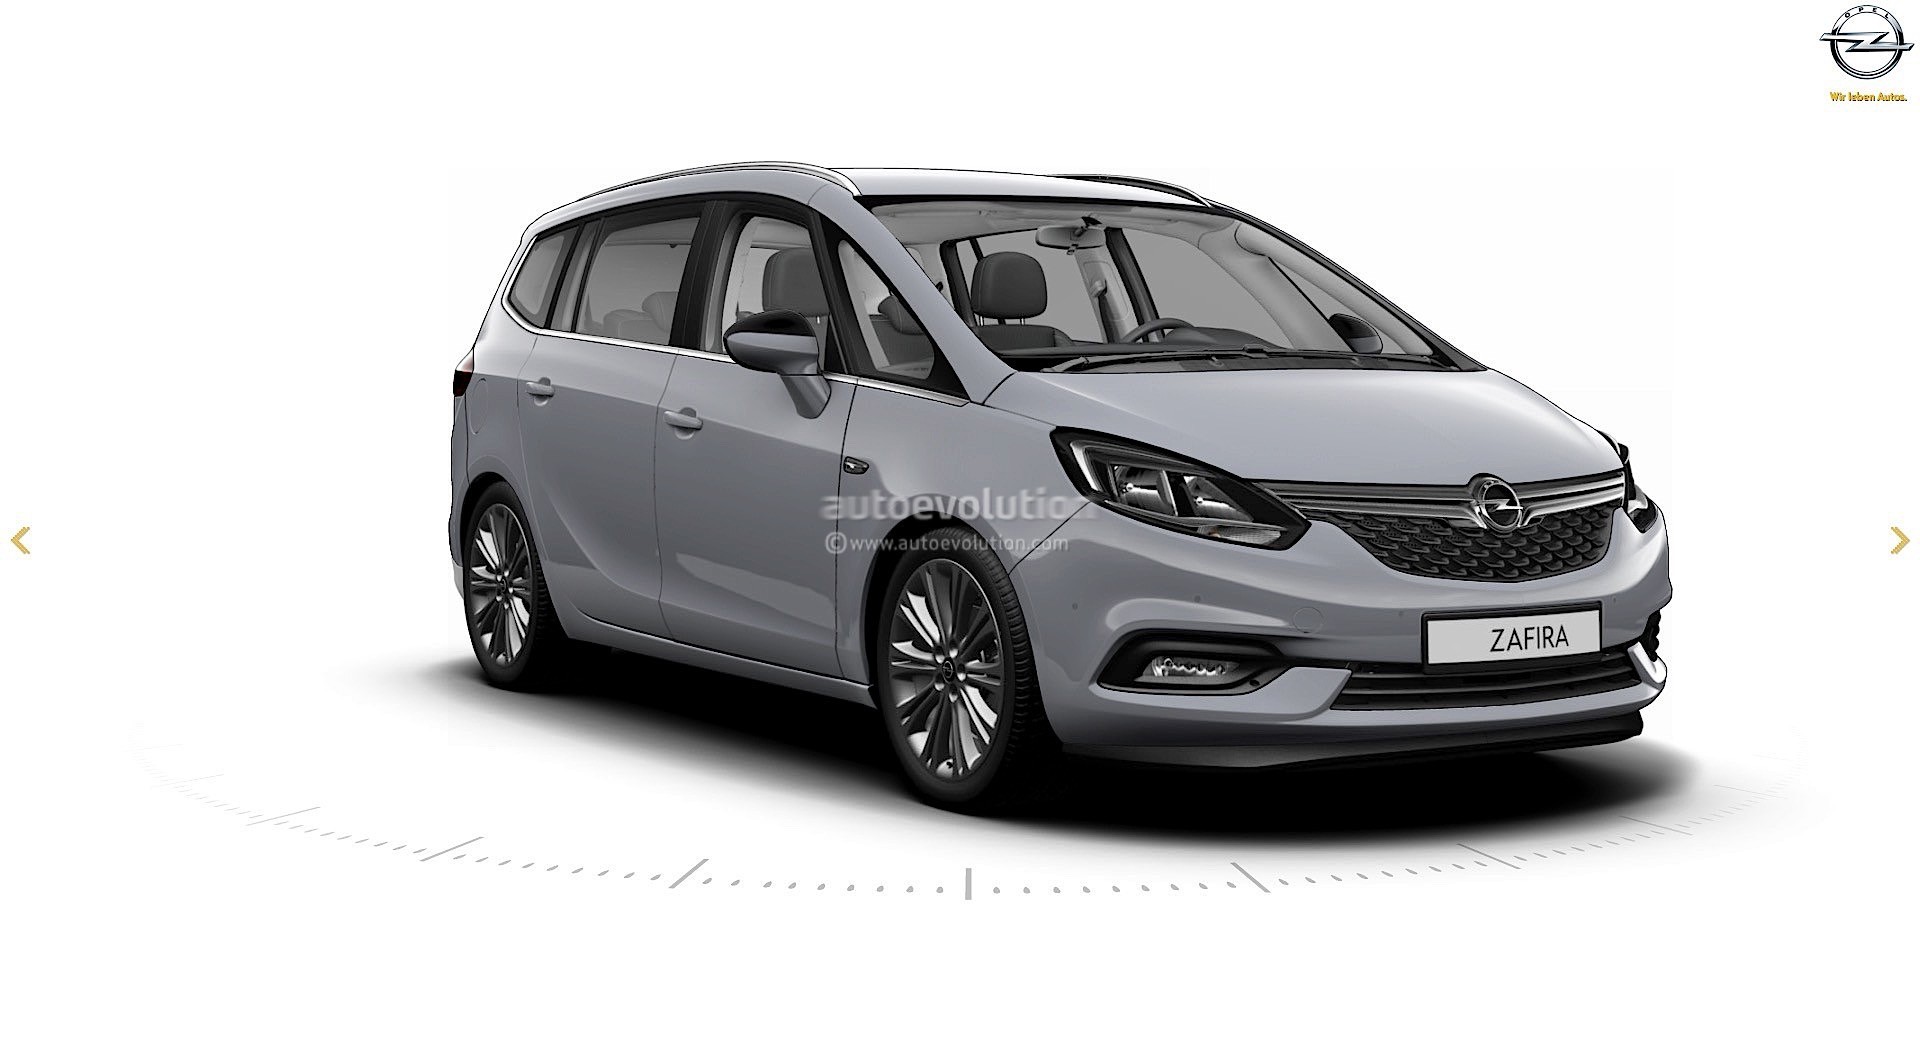 bibliotheek Aanpassen Monopoly 2017 Opel Zafira Facelift Leaked On GM Website, Here Are The First Pics -  autoevolution